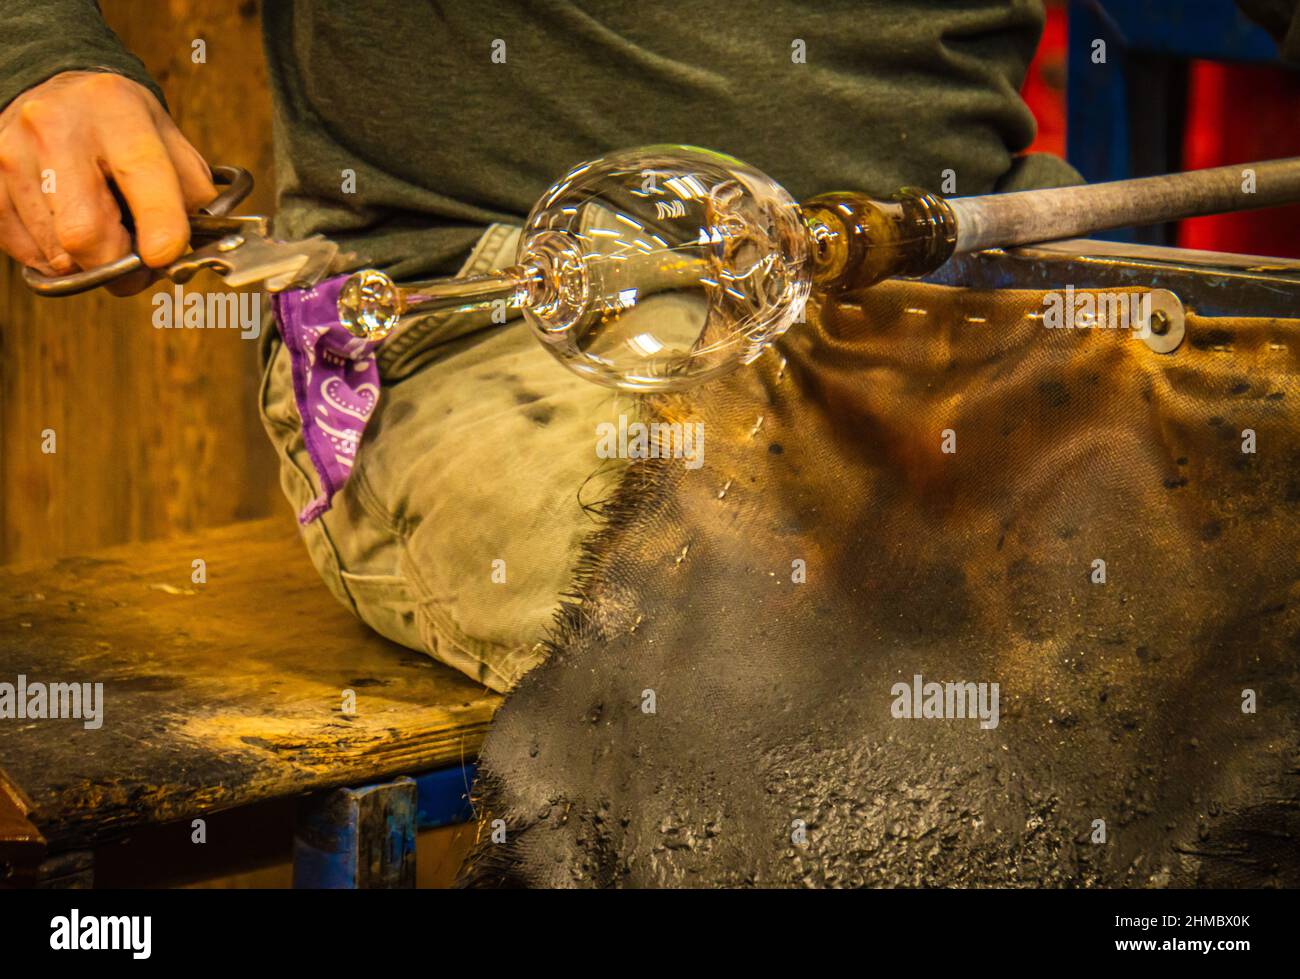 glass blower shaping a glass goblet on his lap while hot Stock Photo